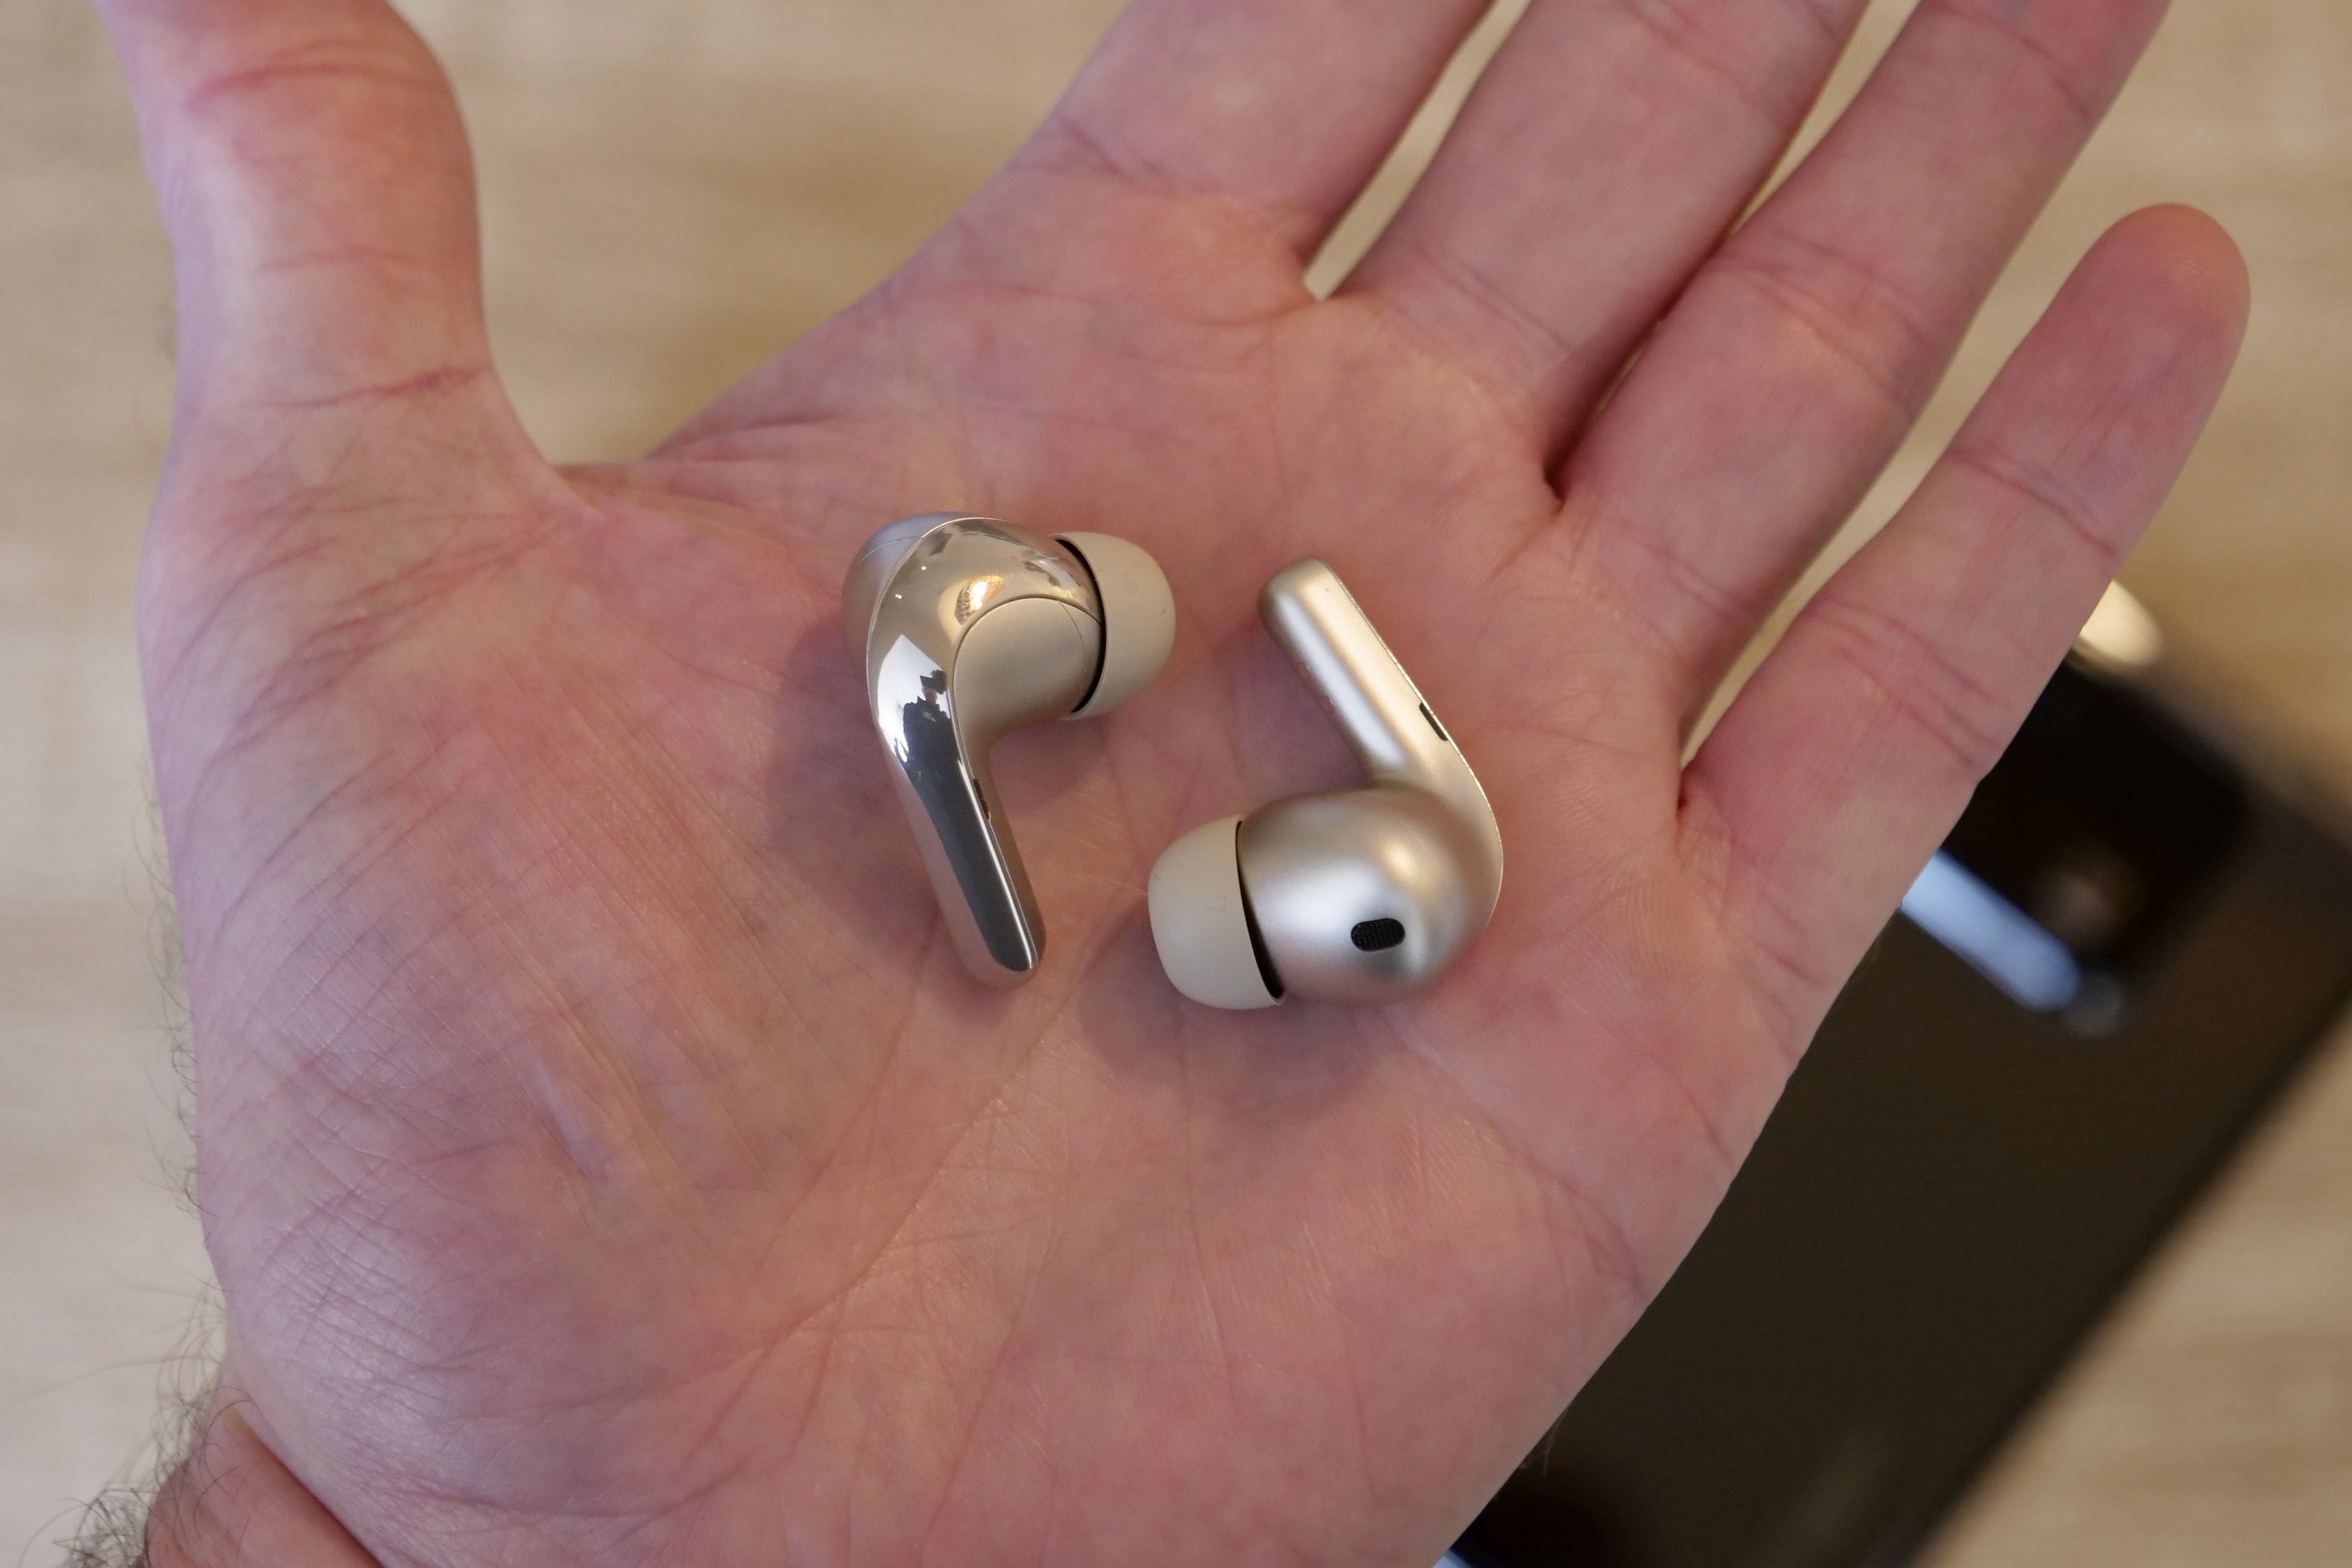 The Xiaomi Buds 4 Pro earbuds in the palm of a person's hand.